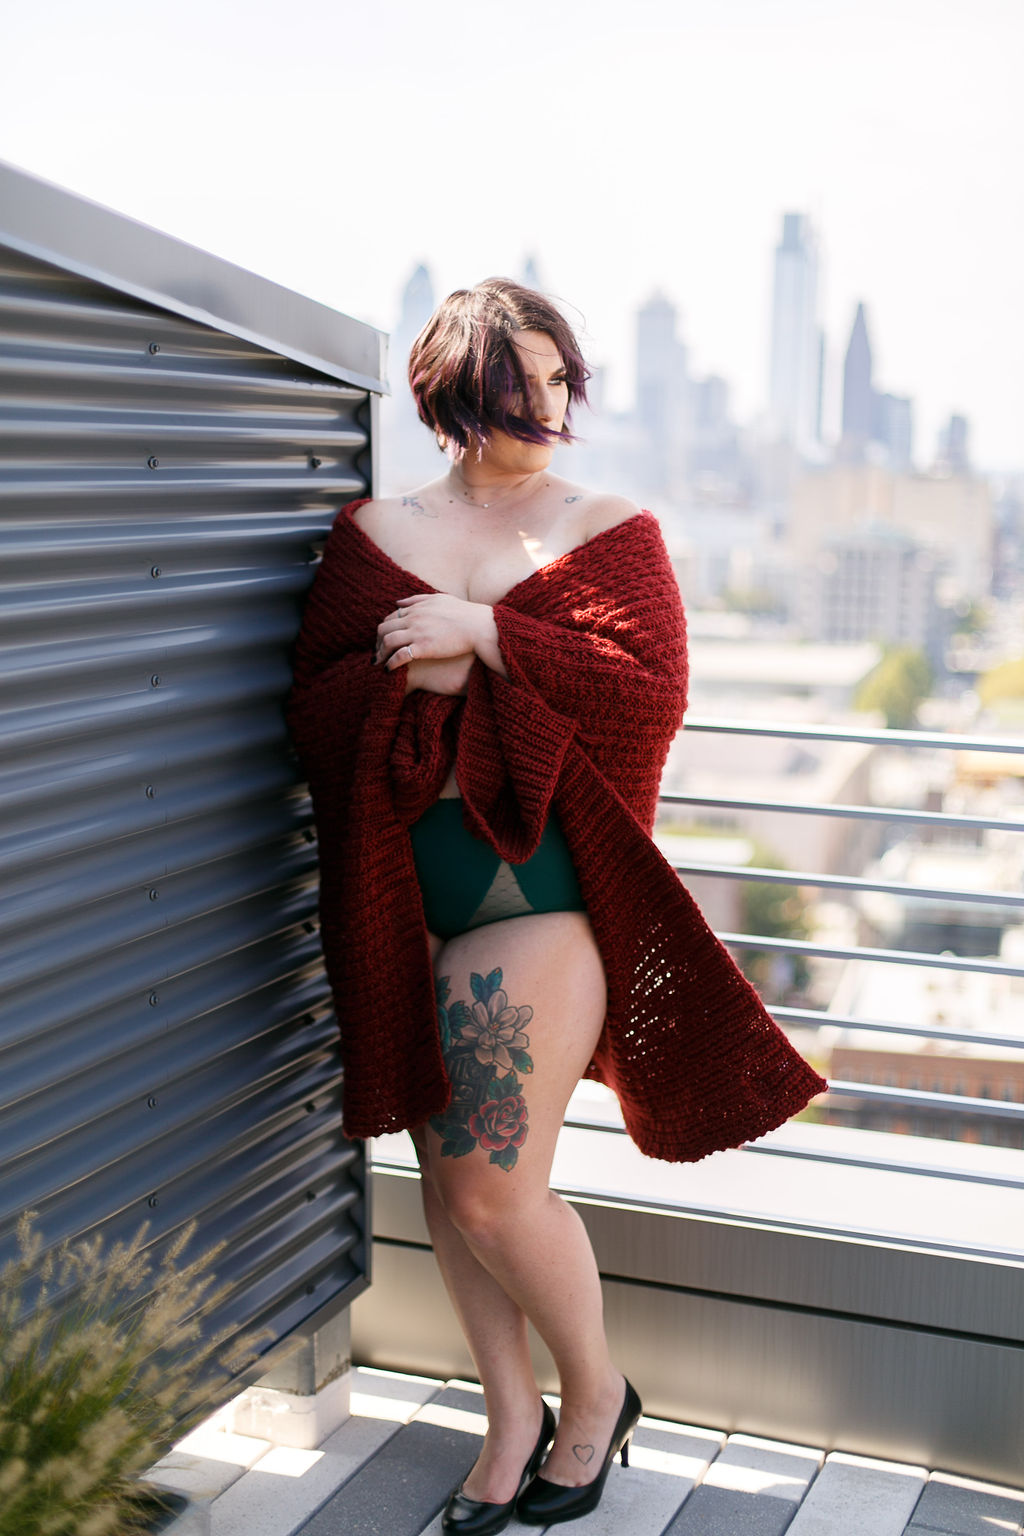 Philly Outdoor Rooftop Boudoir Session by Swiger Photography 40.jpg